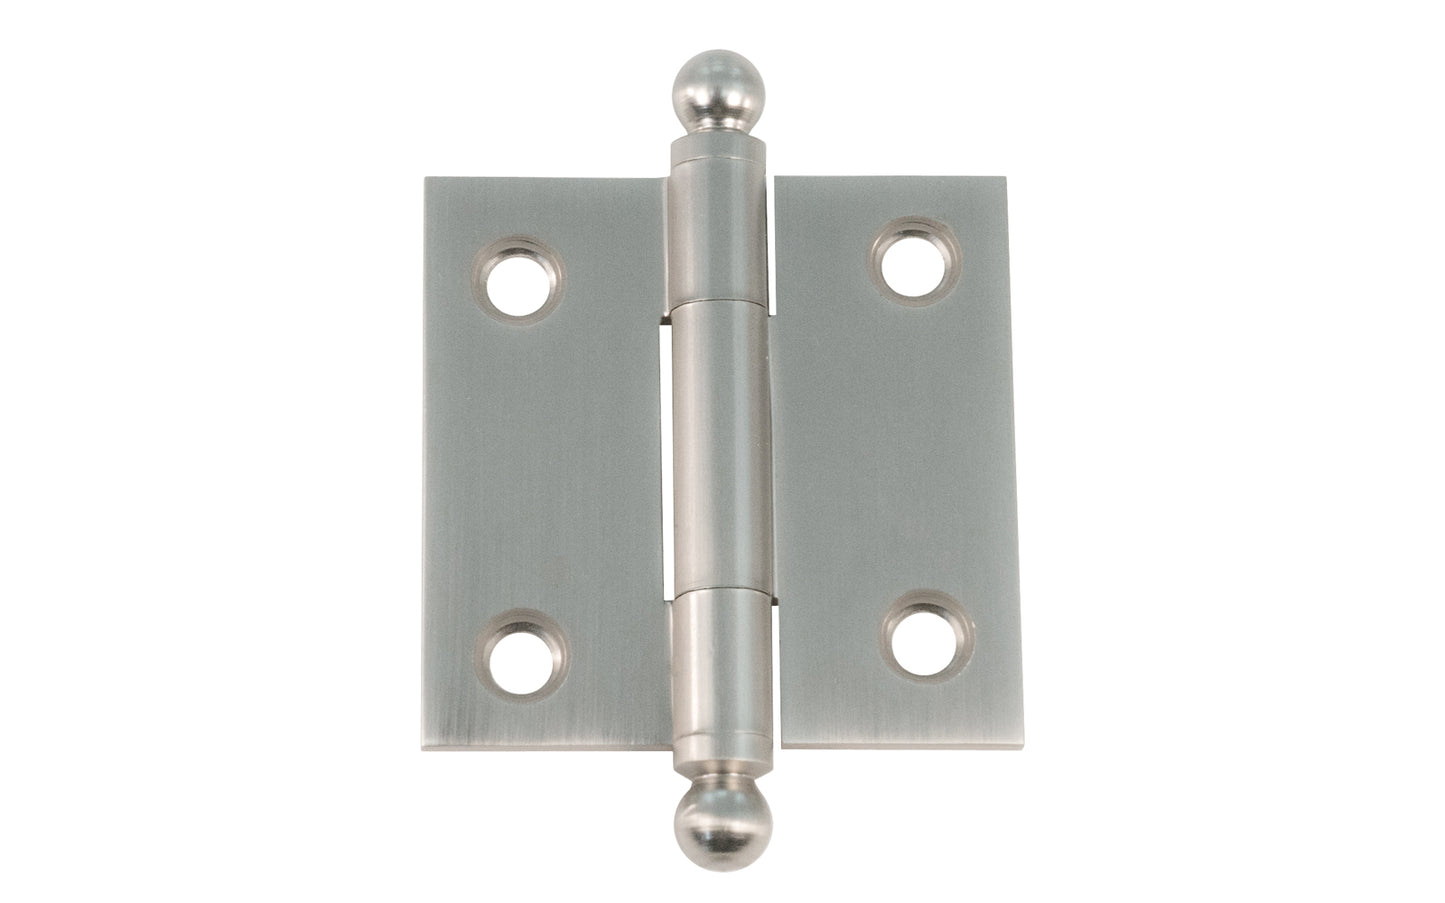 Classic Solid Brass Ball-Tip Cabinet Hinge ~ 1-1/2" x 1-1/2". Full mortise extruded hinges. 3/32" heavy duty leaf thickness gauge. Non-removable fixed hinge pin with ball tips. High quality thick cabinet hinge with ball tips. Brushed nickel finish.